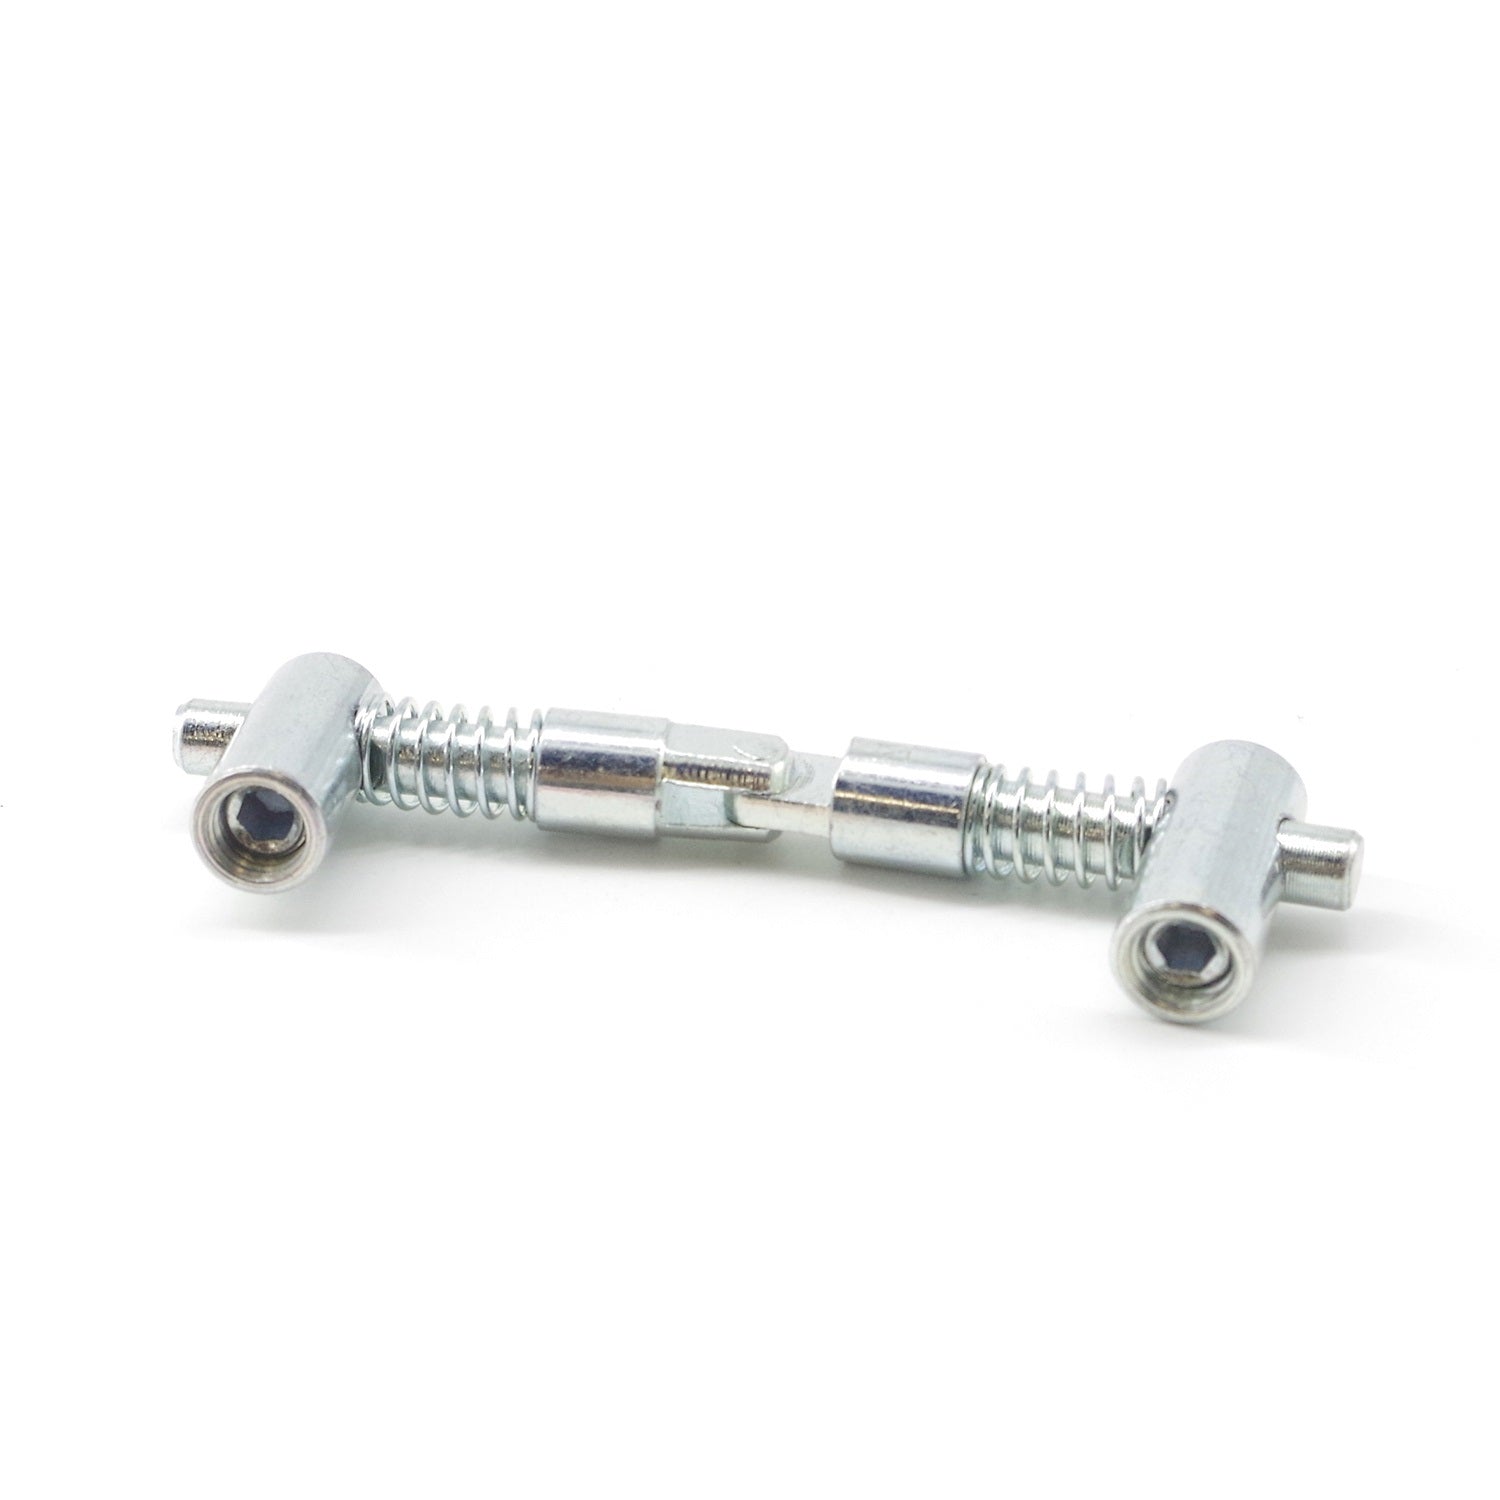 30 Series Double Head Anchor 0 - 180 Degree ( 0 Degree Central Adjustable Angle Connector)